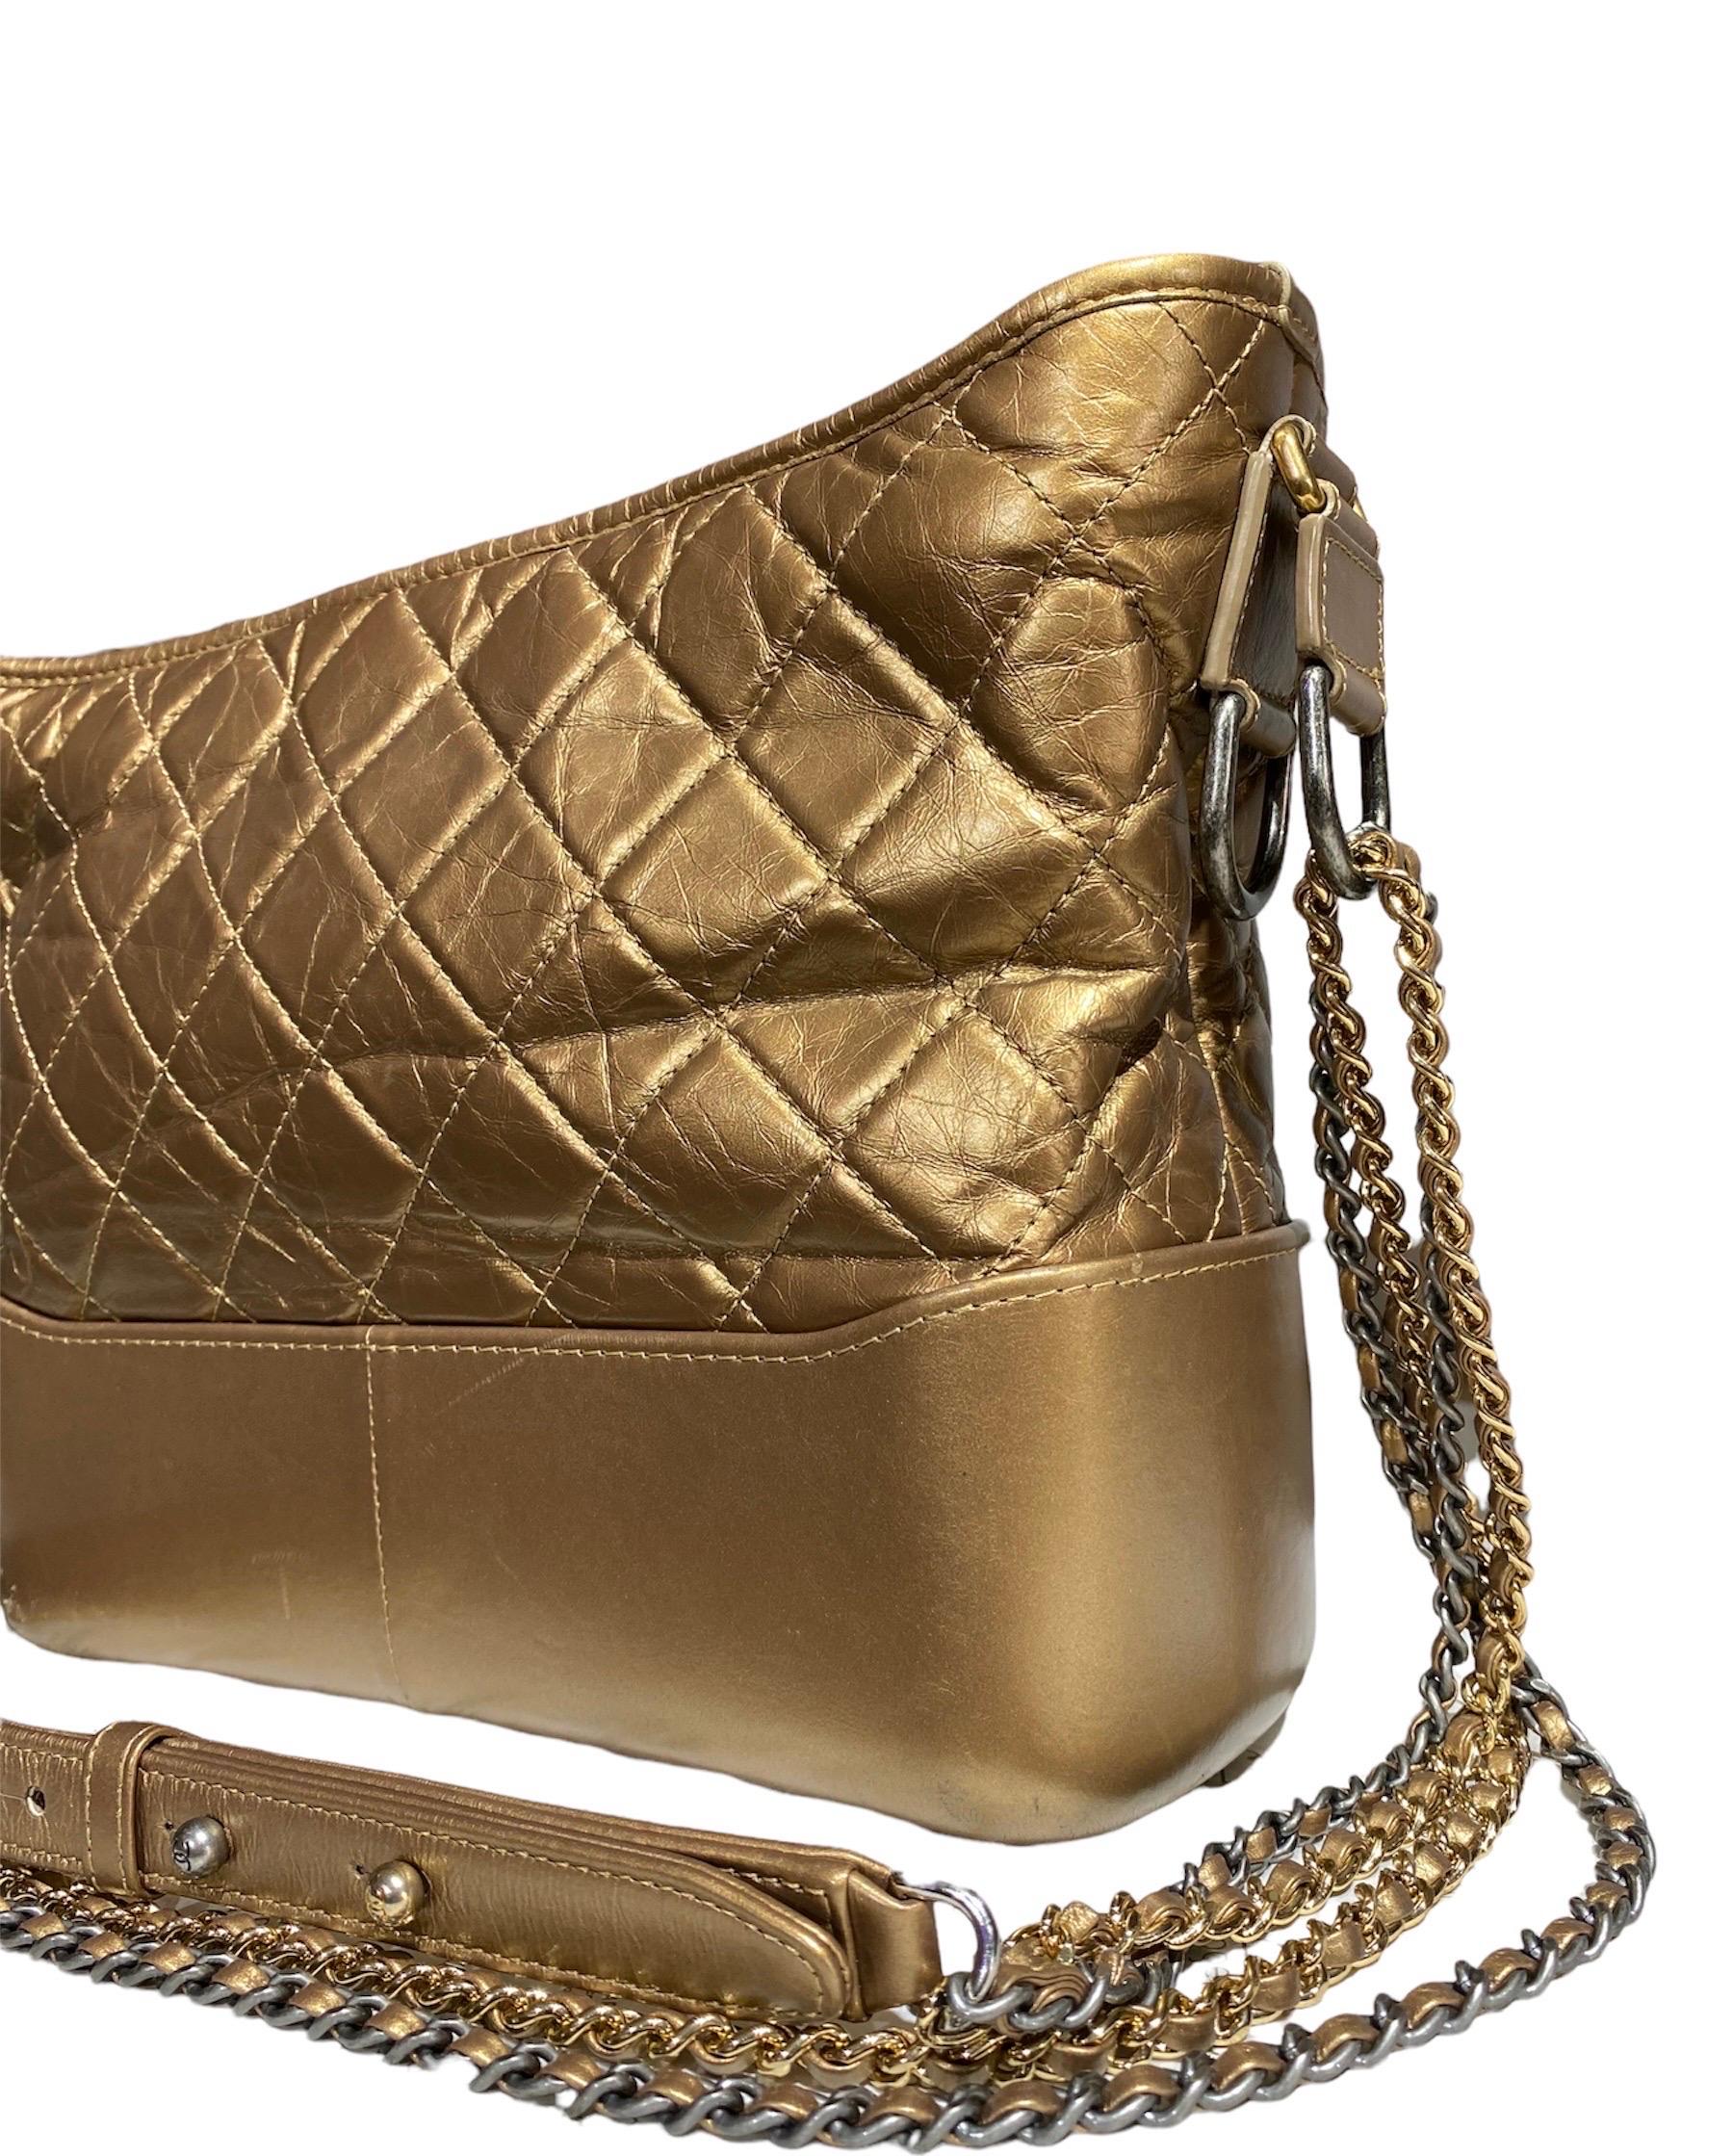 Chanel Gabrielle Gold Medium  In Good Condition For Sale In Torre Del Greco, IT